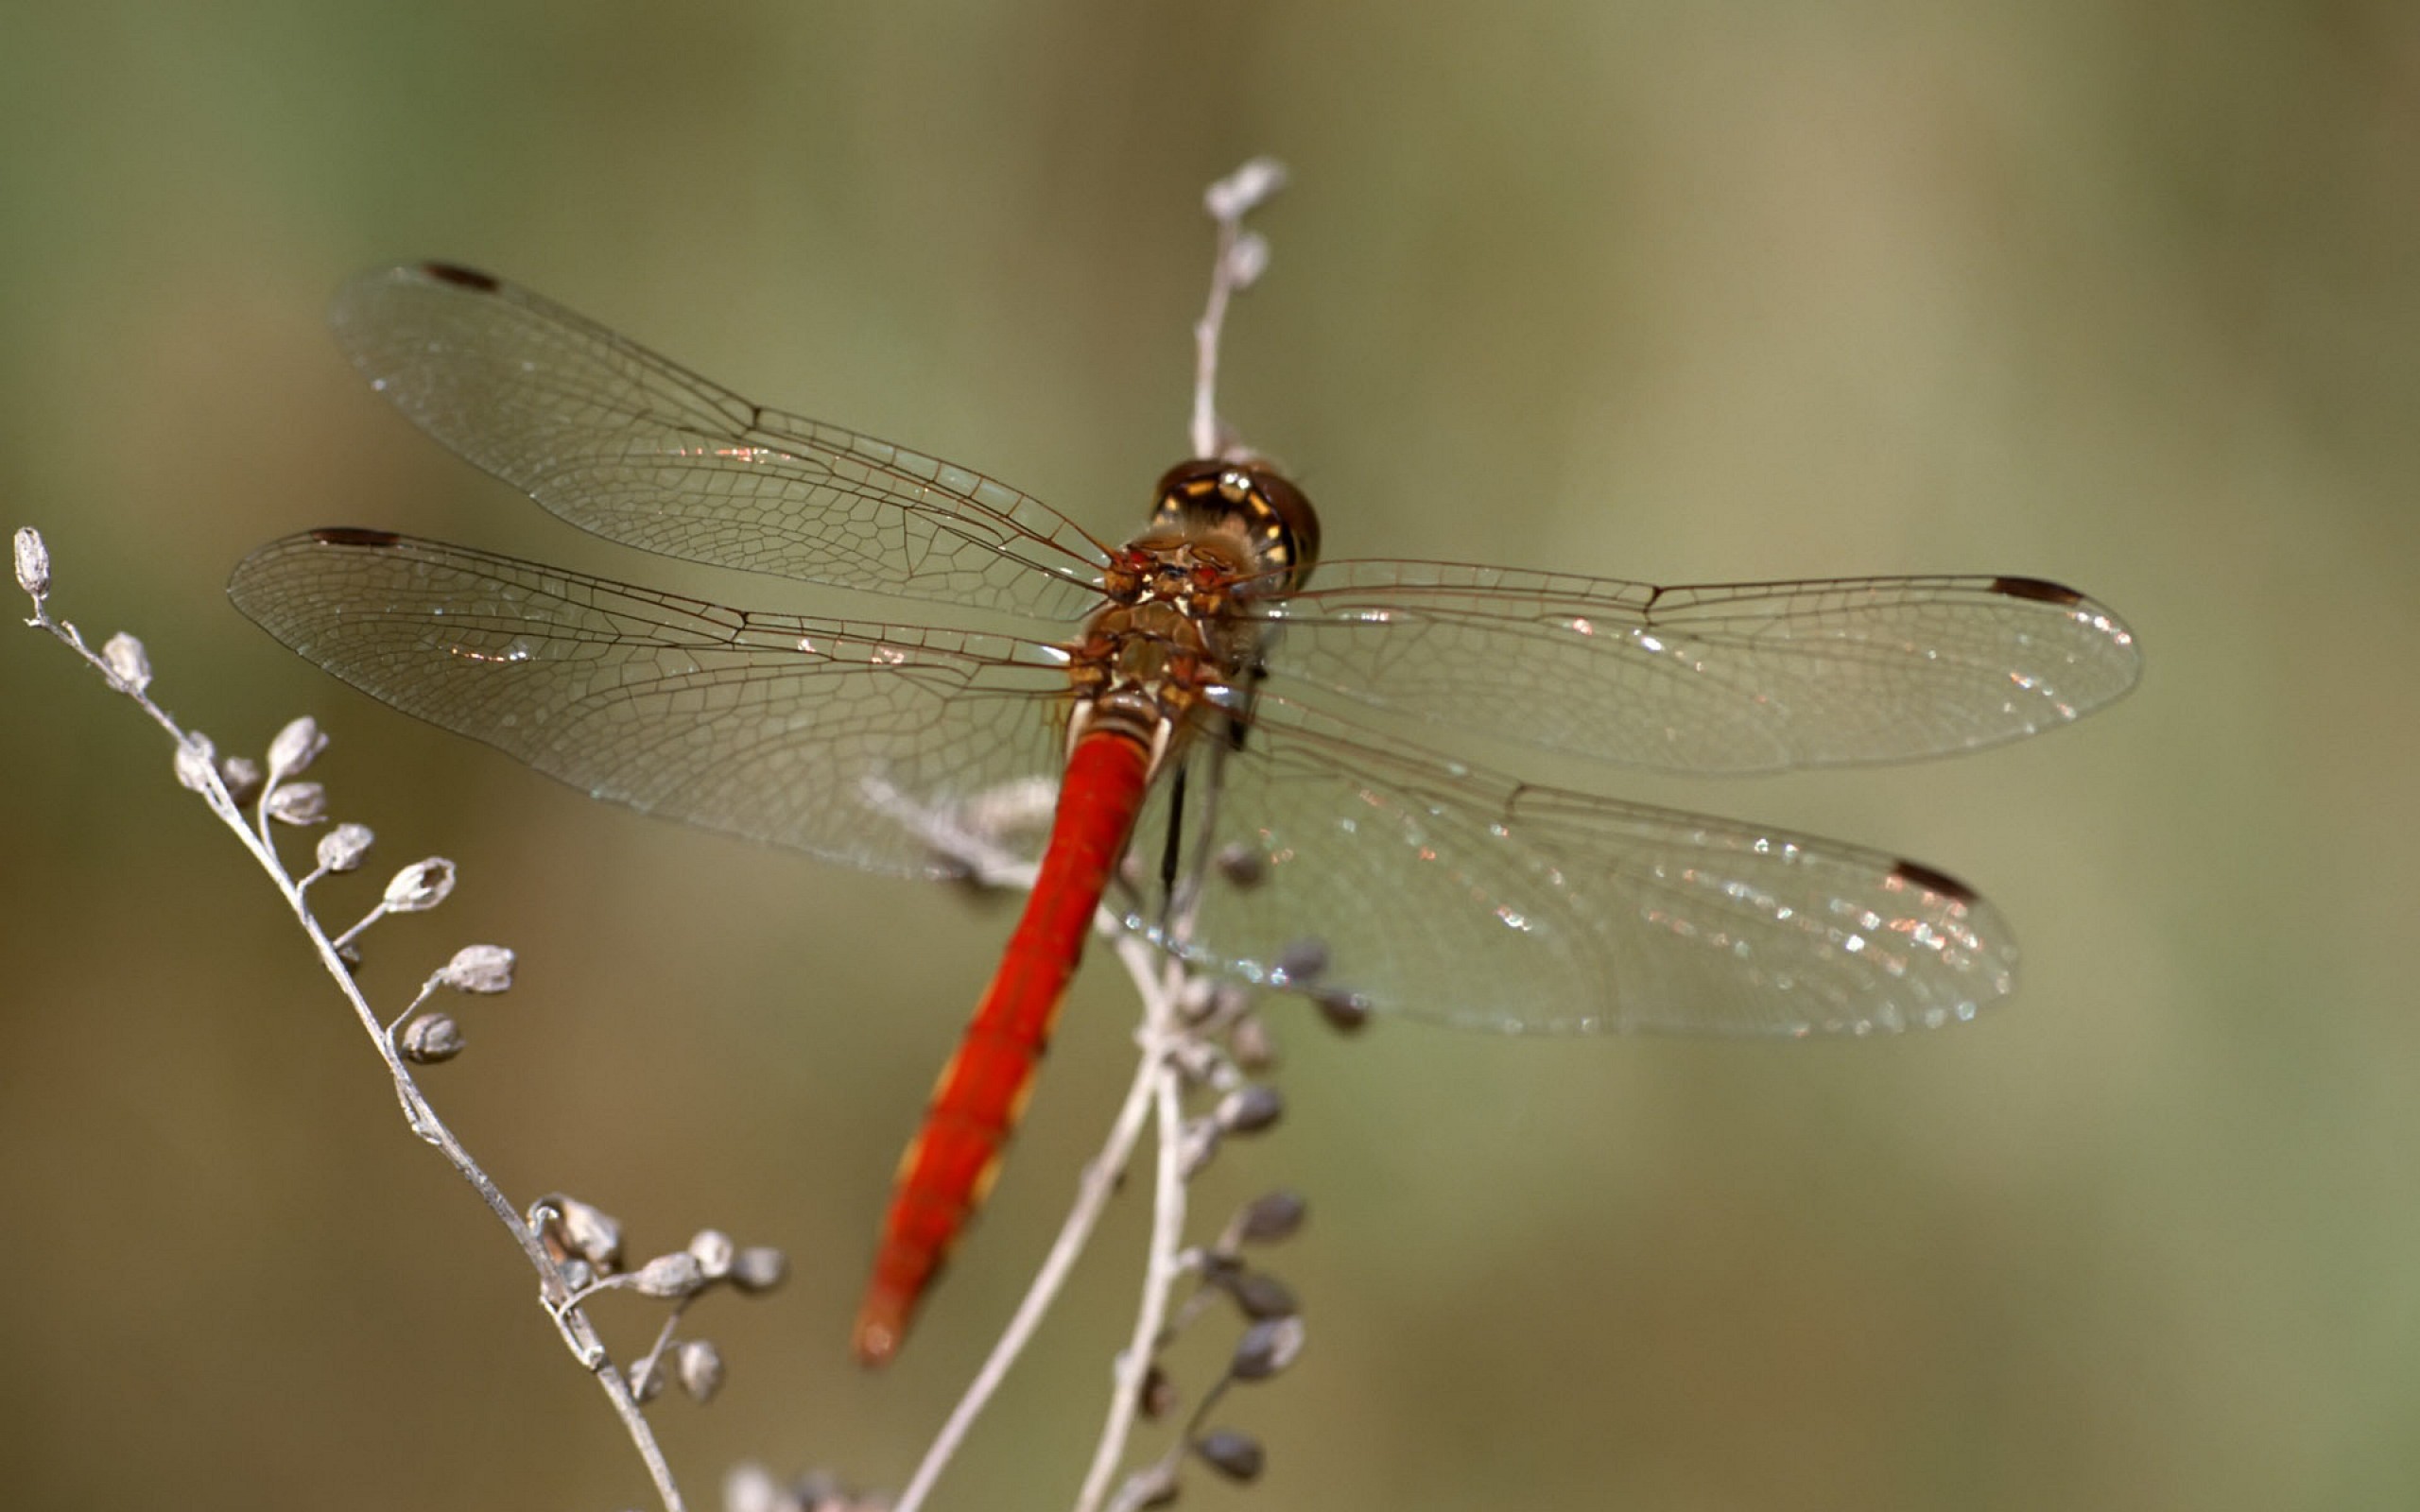 Big Red Dragonfly Wallpaper - Download Wallpaper Nature Free